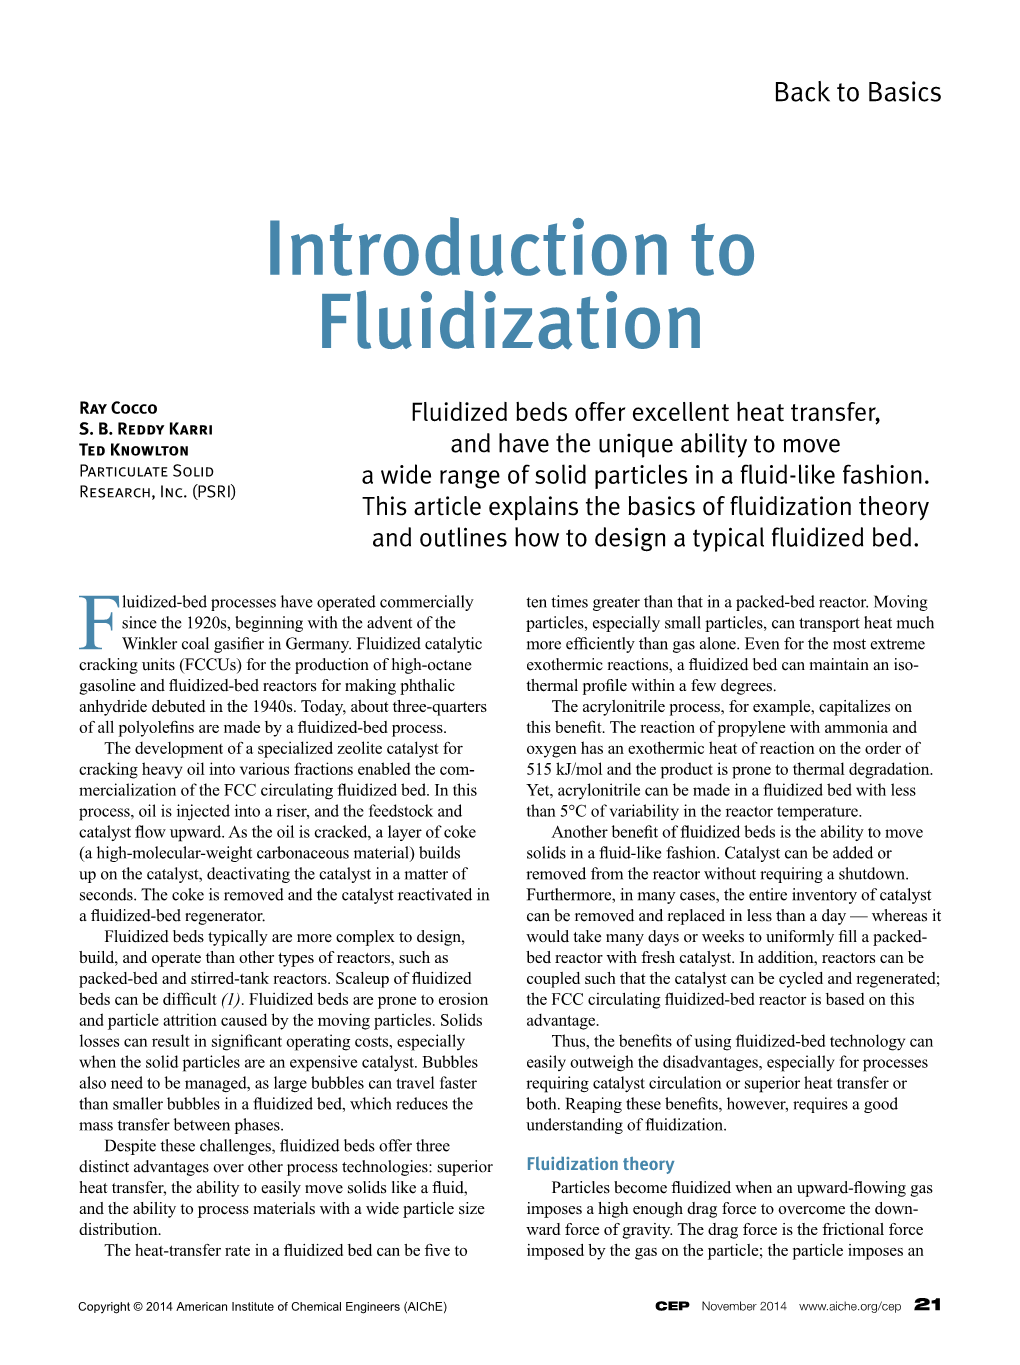 Introduction to Fluidization